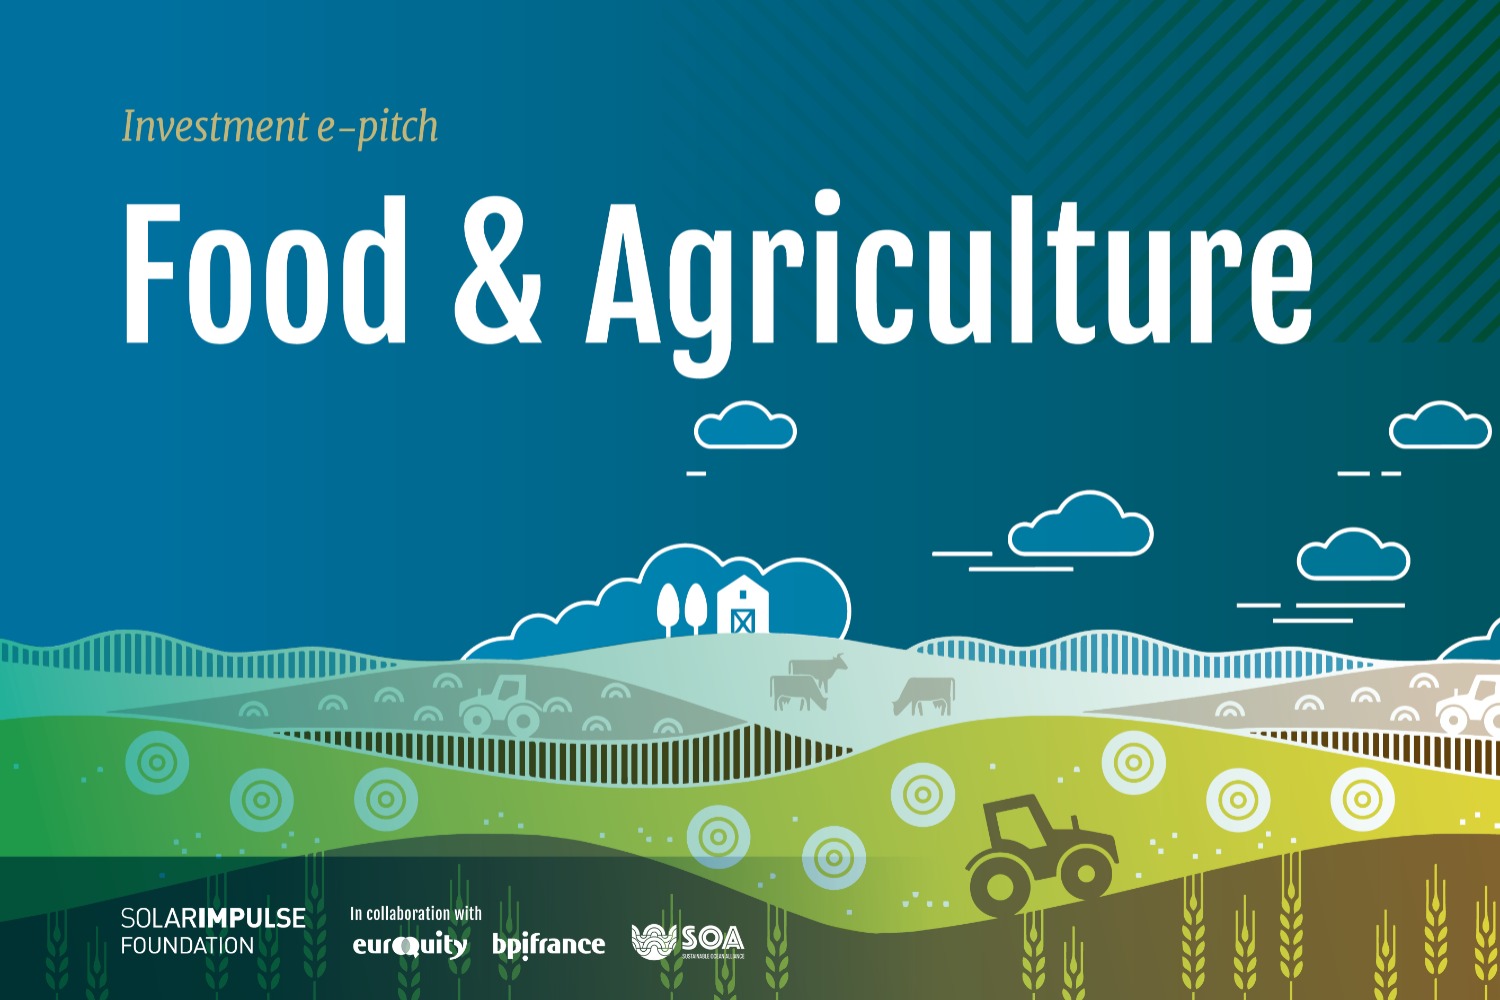 Food & Agriculture investment e-pitch